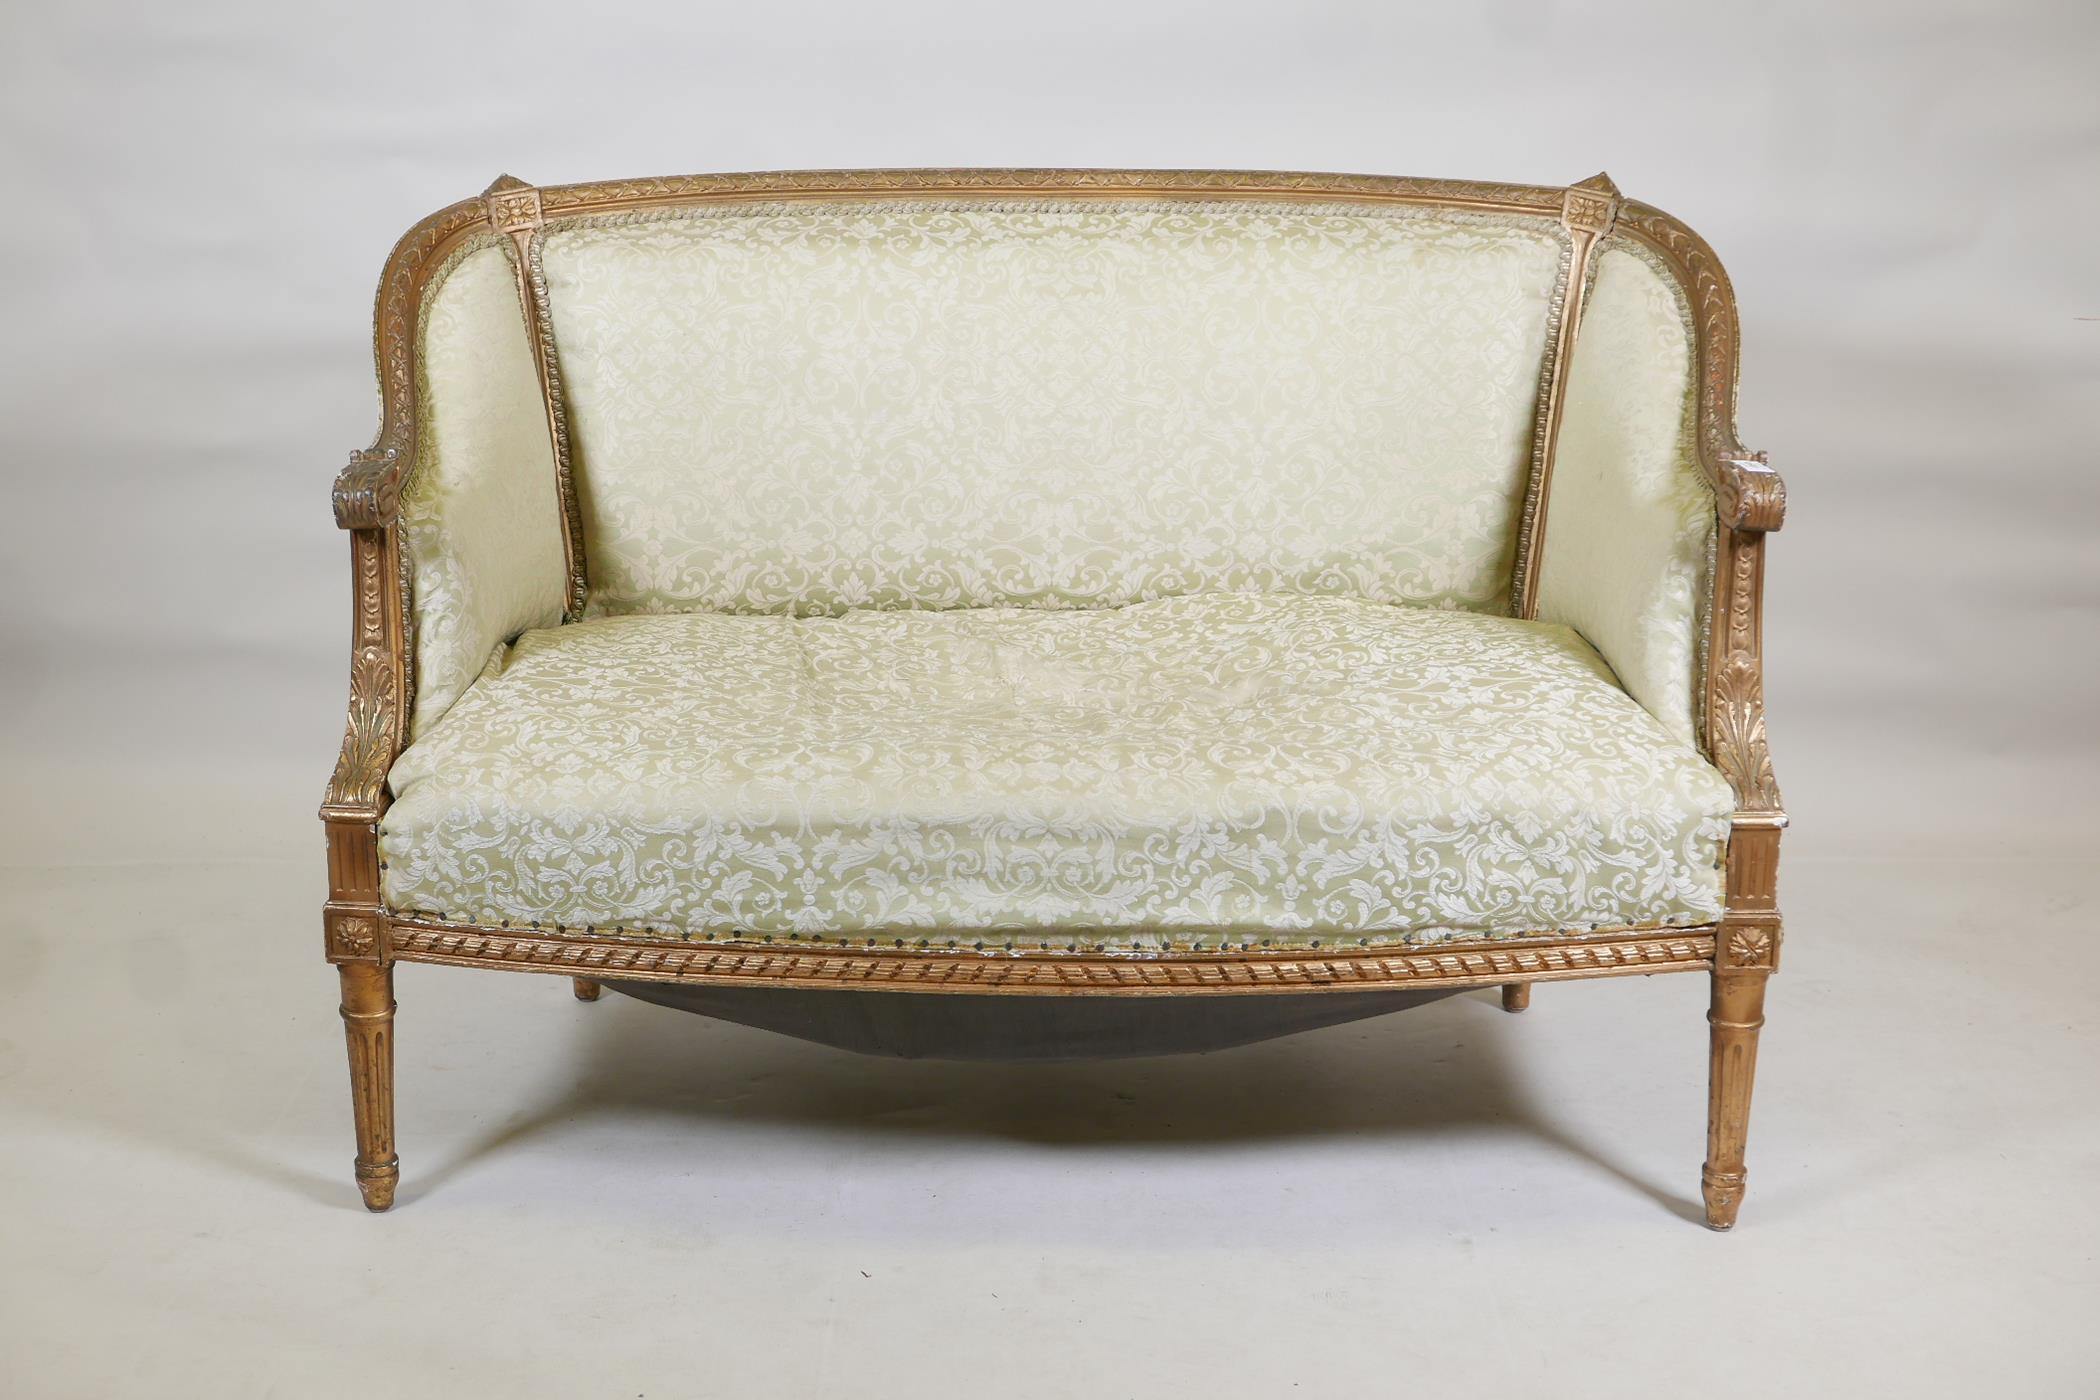 An early C20th giltwood canape, with moulded decoration, raised on fluted supports, 45" wide